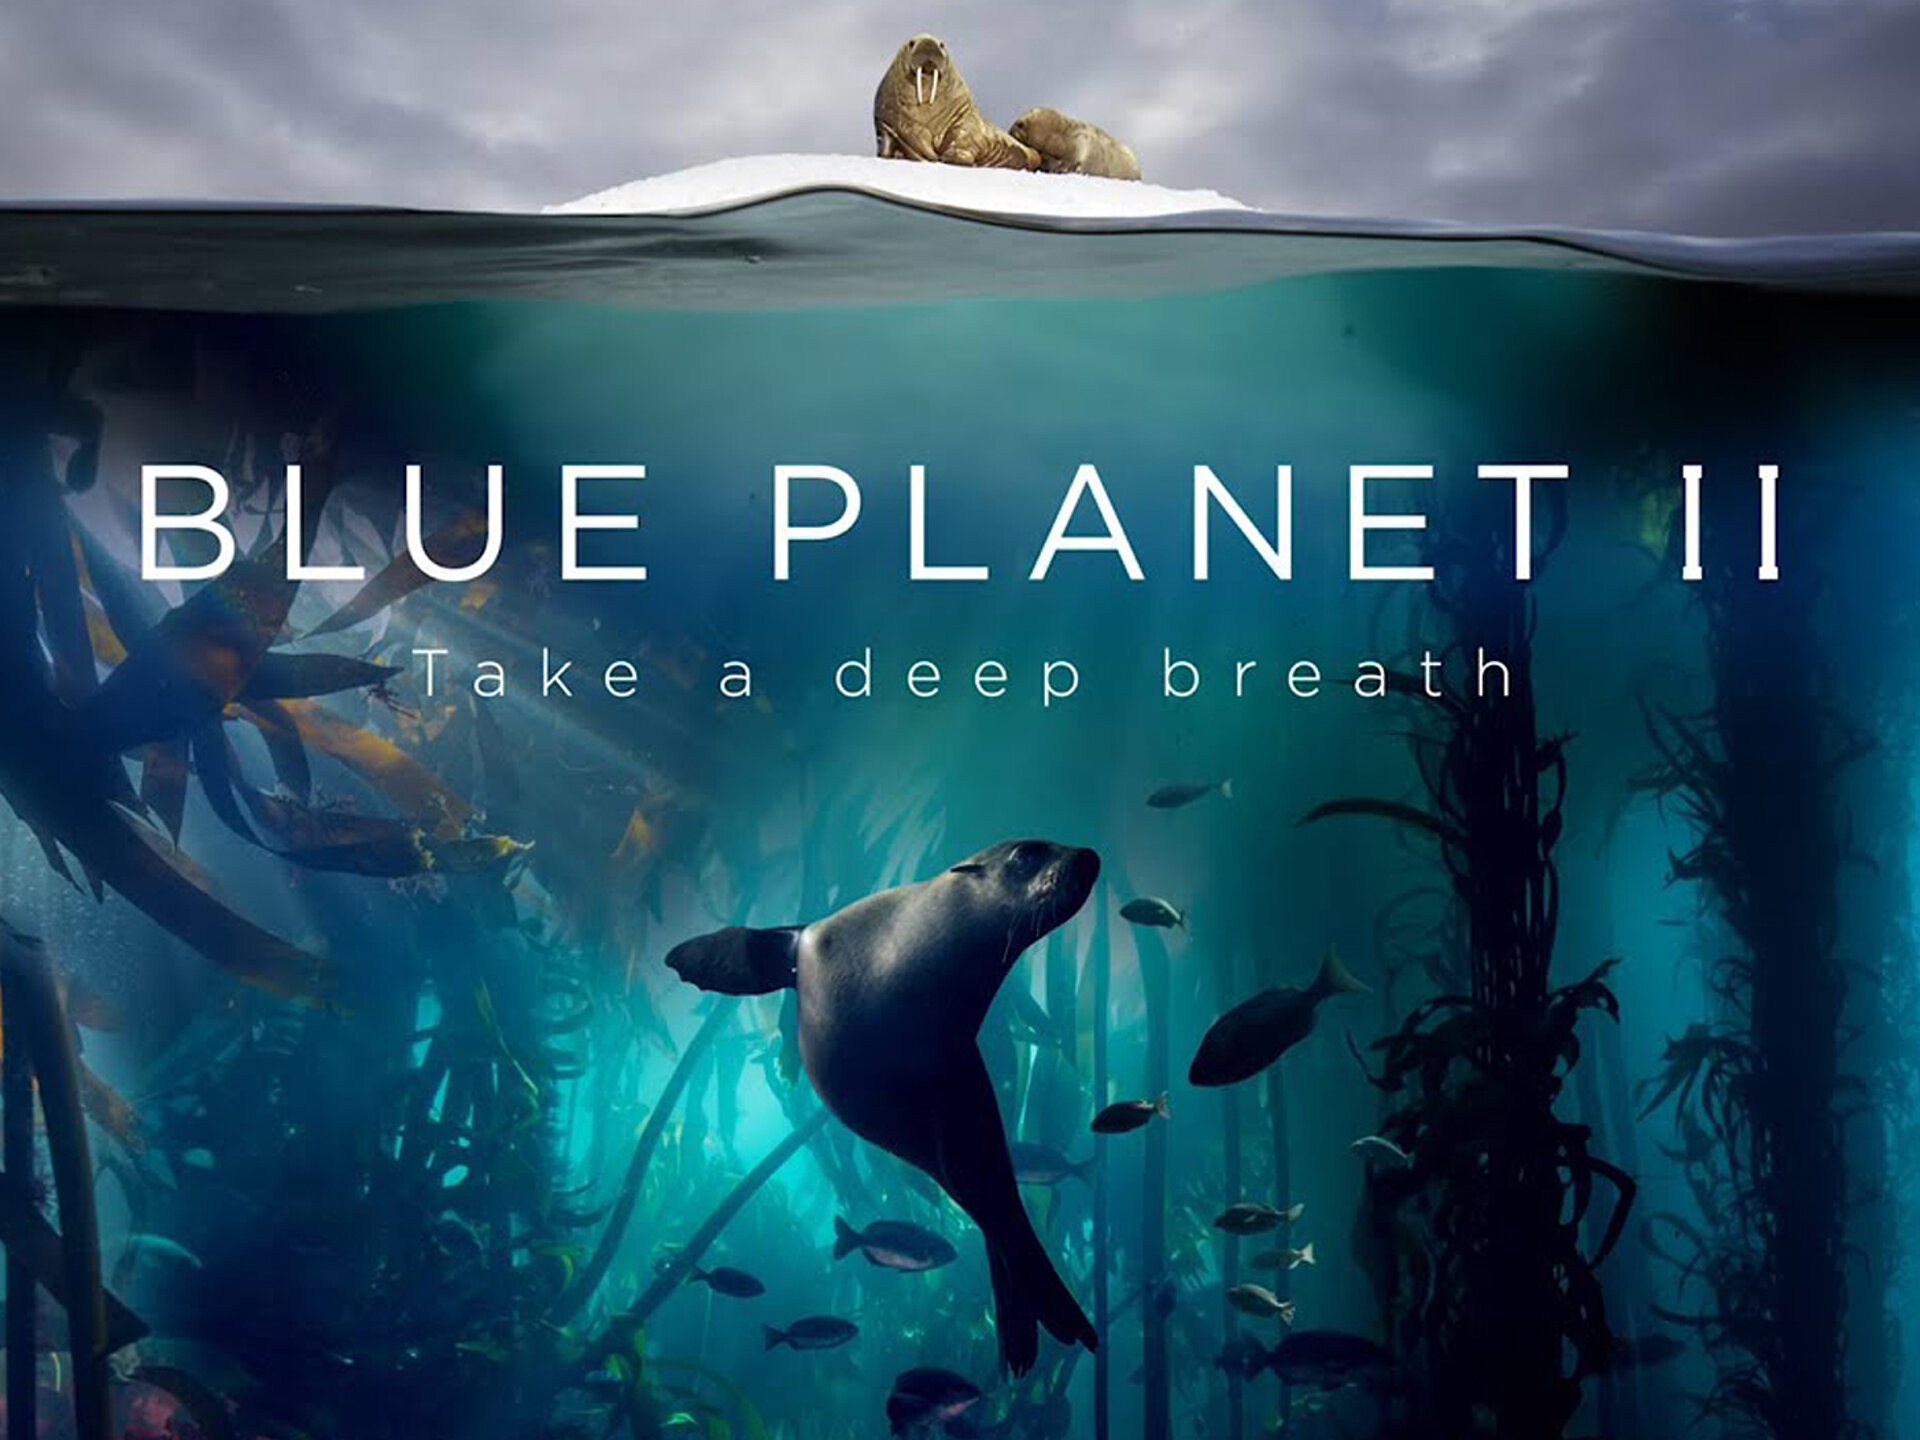 the blue planet